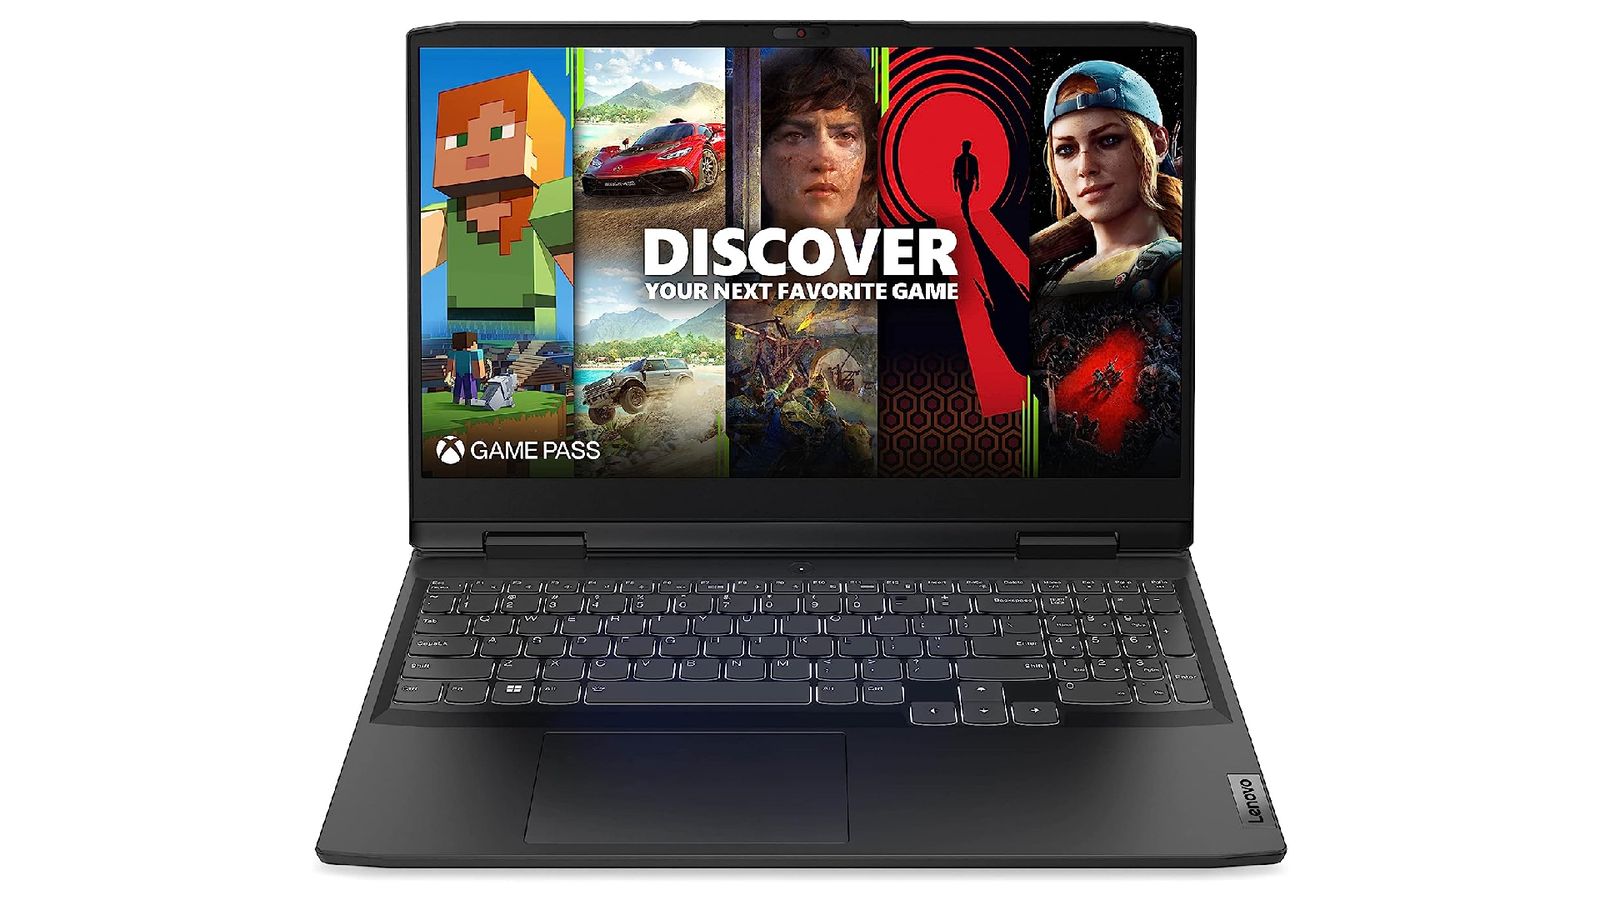 Lenovo IdeaPad Gaming 3 product image of a black gaming laptop featuring images from multiple games on the display, including Minecraft.